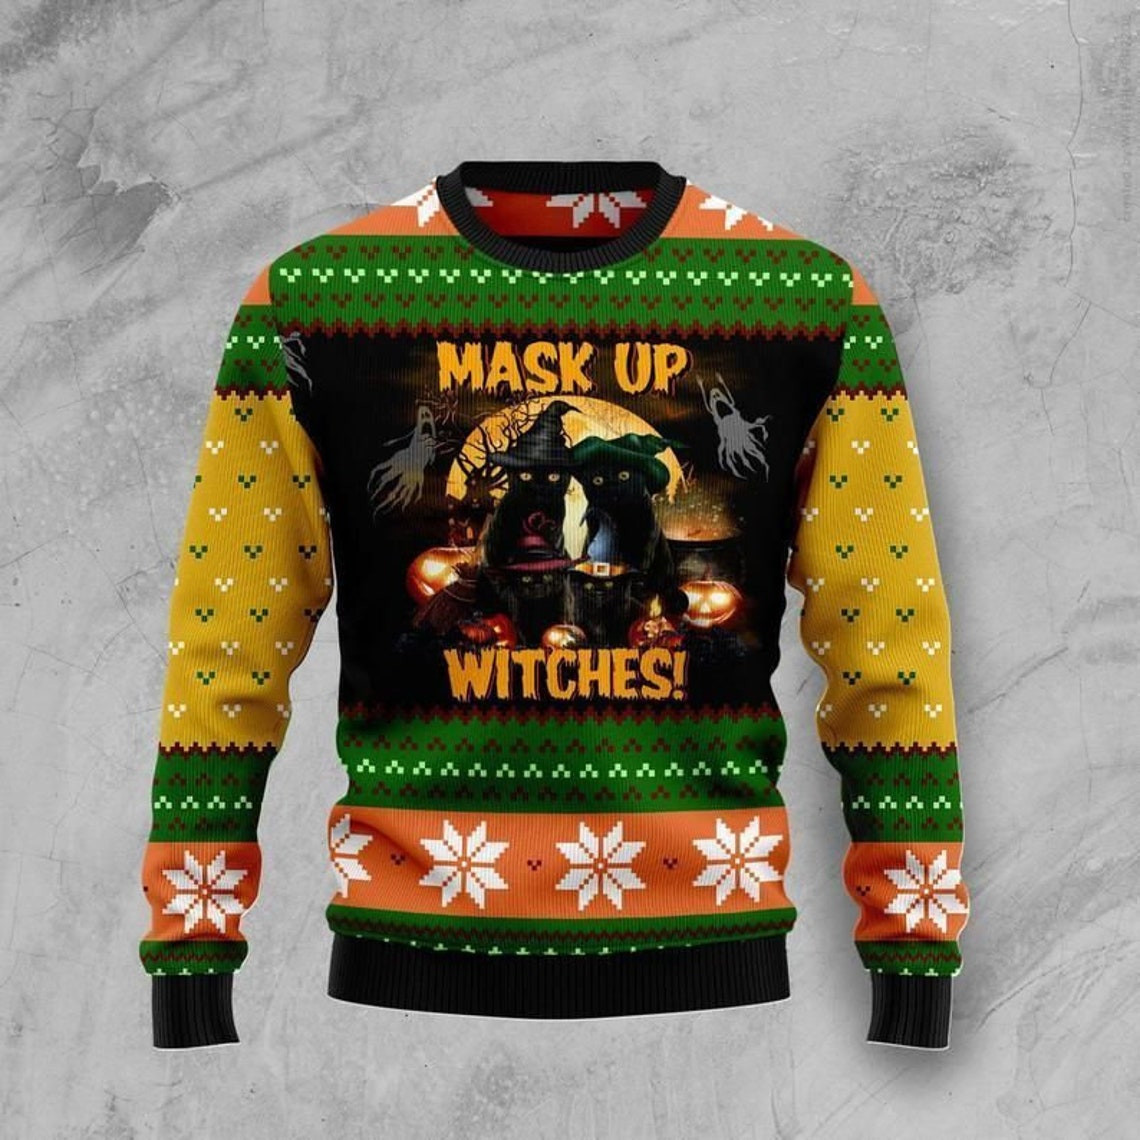 Black Cat Mask up Witches Occasion Christmas Holiday Ugly Sweater